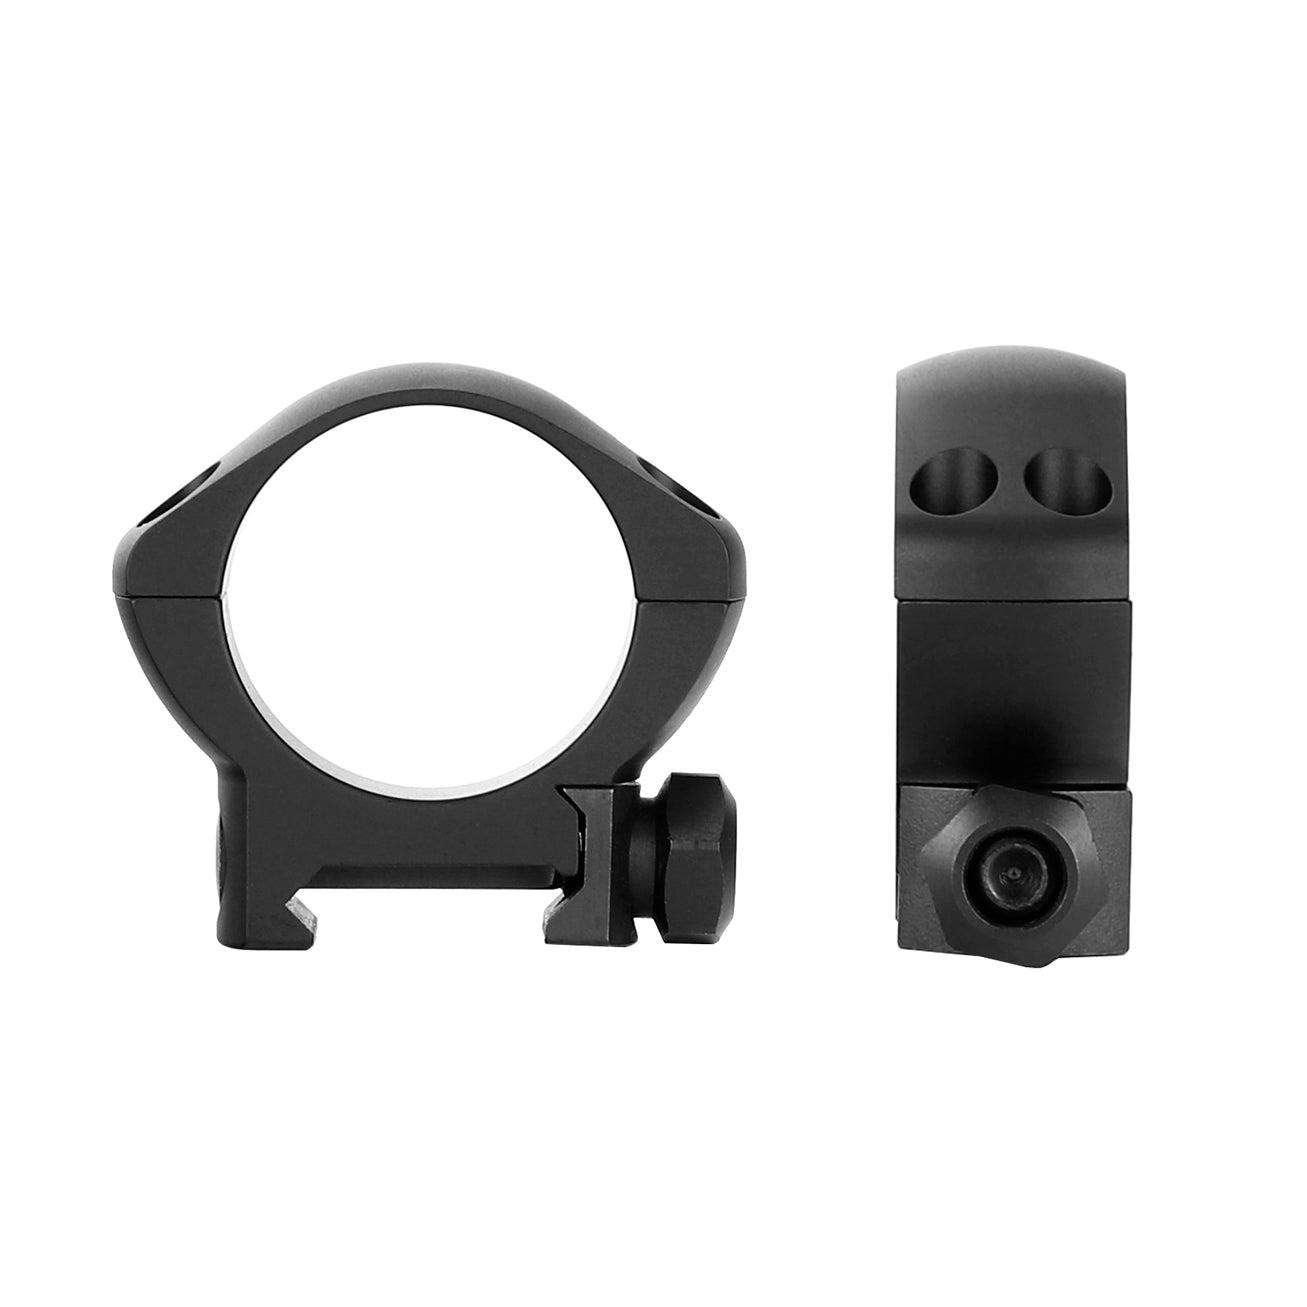 ohhunt® Pro 30mm Scope Rings for Picatinny Rail 7075 Aluminum Low Profile